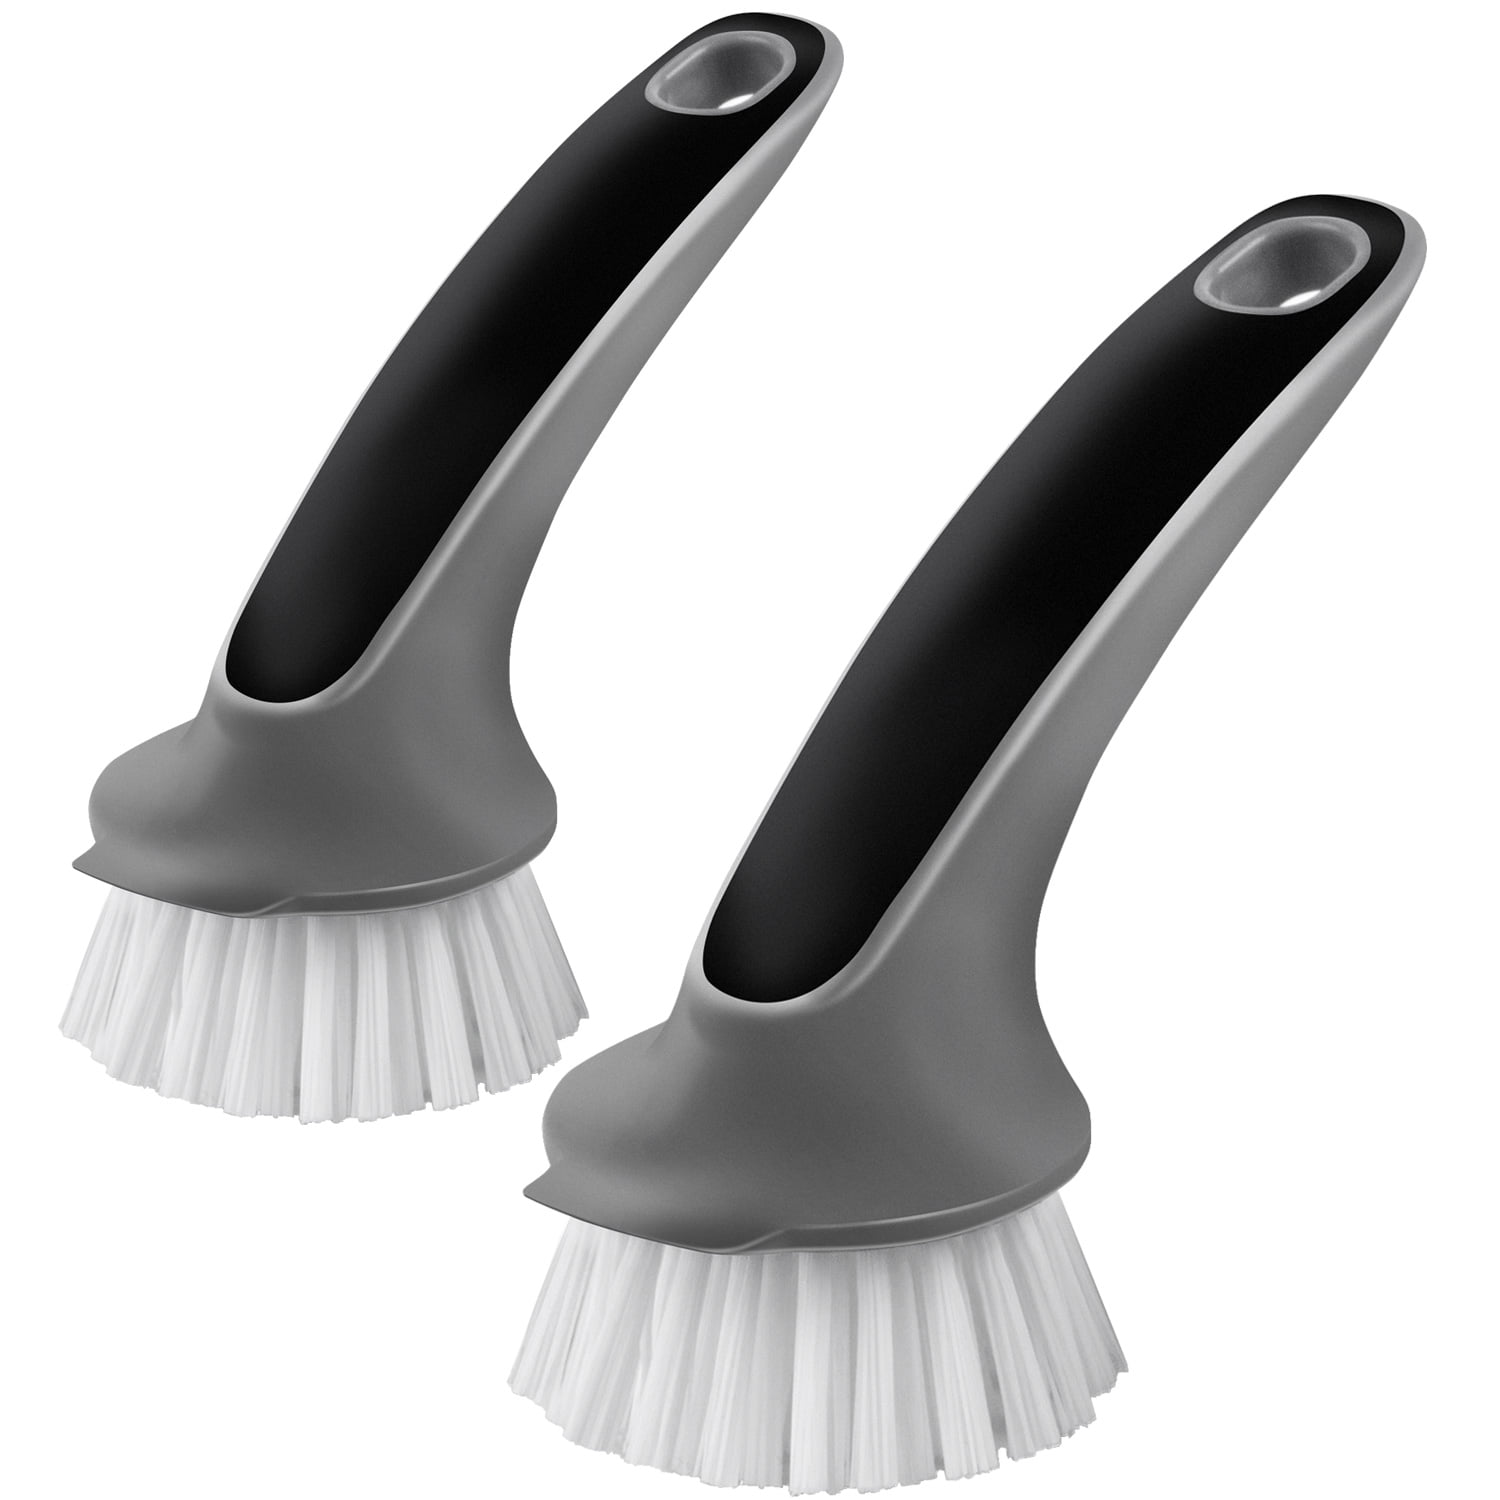 Pot and Pan Cleaning Brush, 2-Pack Kitchen Scrub Brush with Non-Slip  Handle, Dish Brush for Pot Pan Cast Iron Skillet Dishes Cleaning, Sink  Bathroom Brushes 